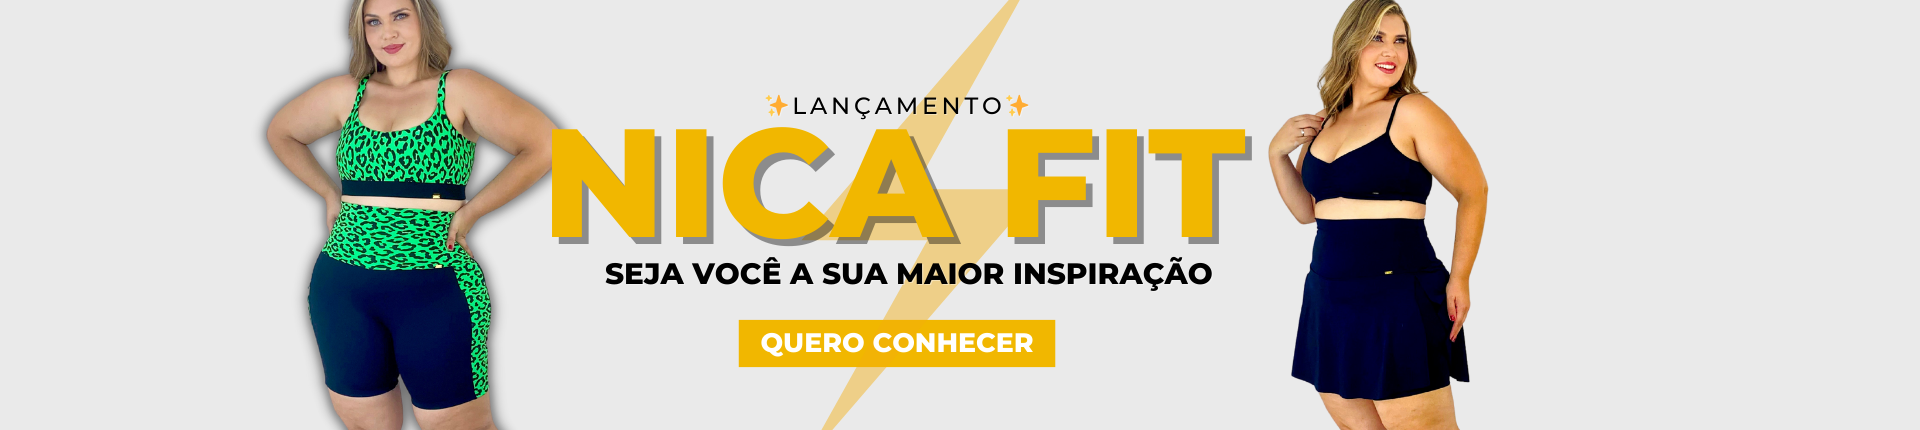 Nica Fit